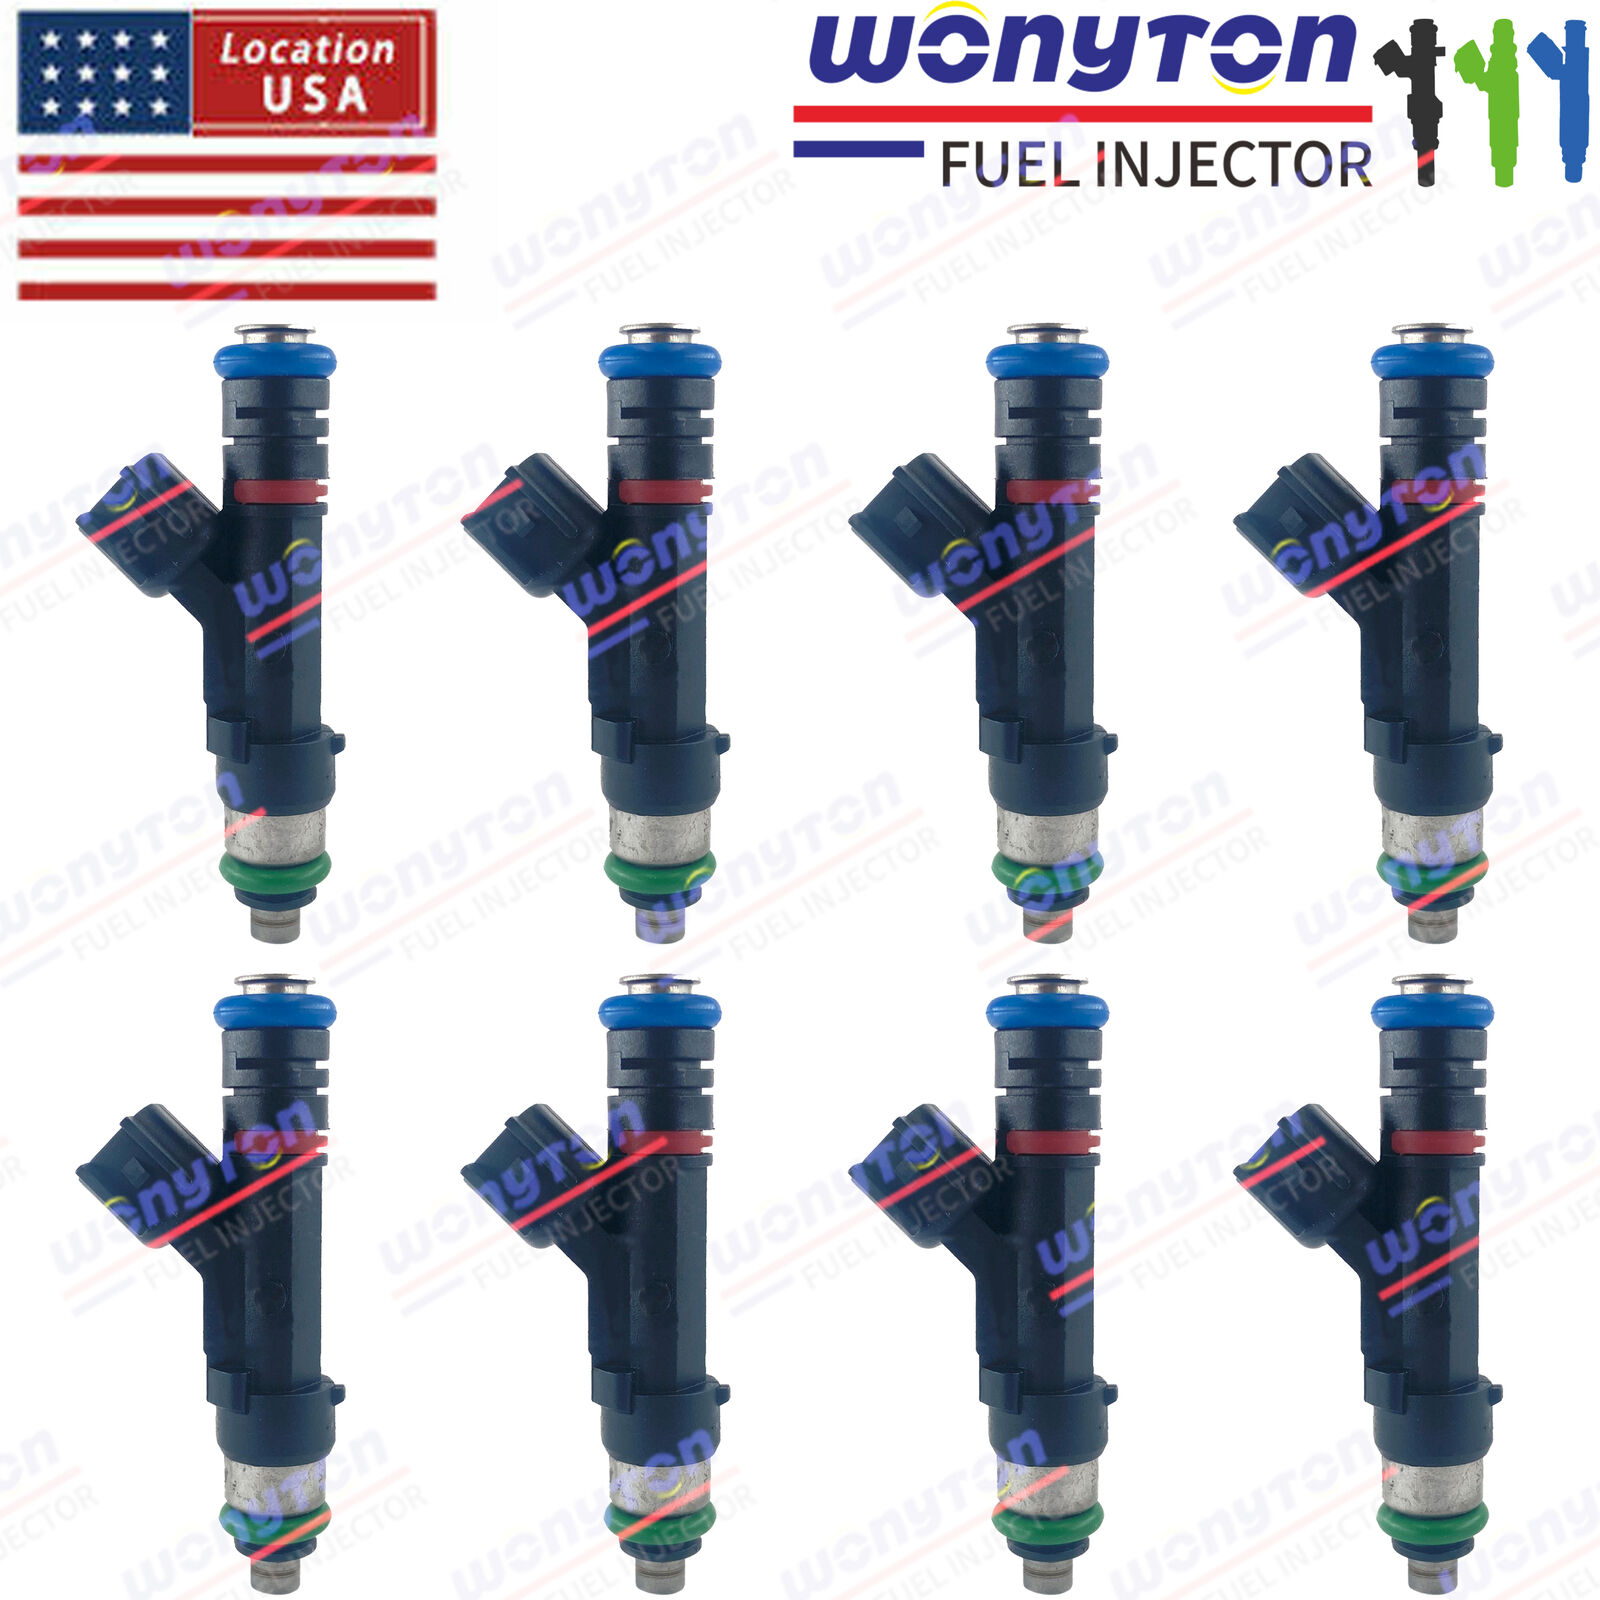 8x EV14 Fuel Injector For 2010-2014 Ford E-150 5.4L V8 29lbs Upgrade 0280158193